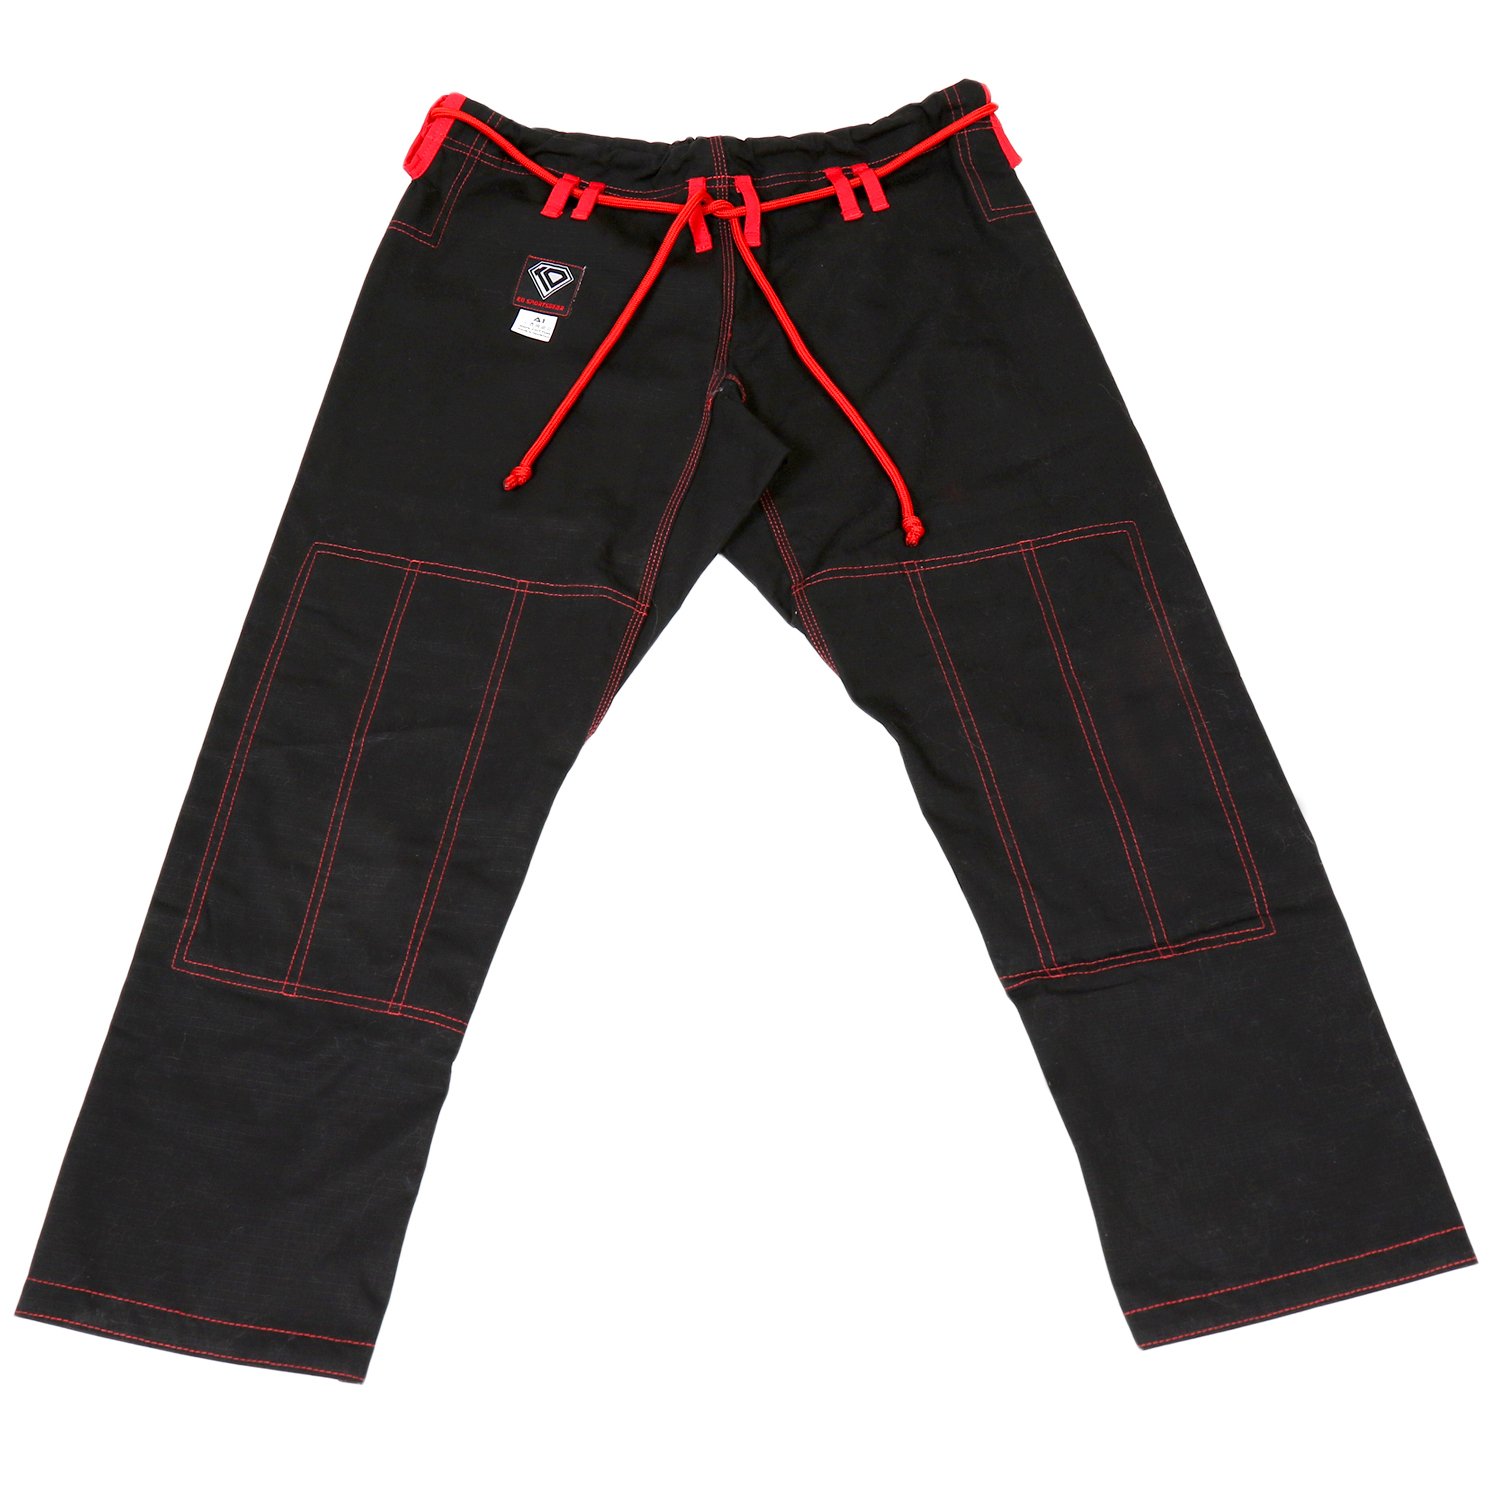 Buy NAMAZU Karate Pants for Kids and Adult 7oz Ploy/Cotto Lightweight  Student Karate Gi Pants Elastic Waist Martial Arts Pants at Amazon.in